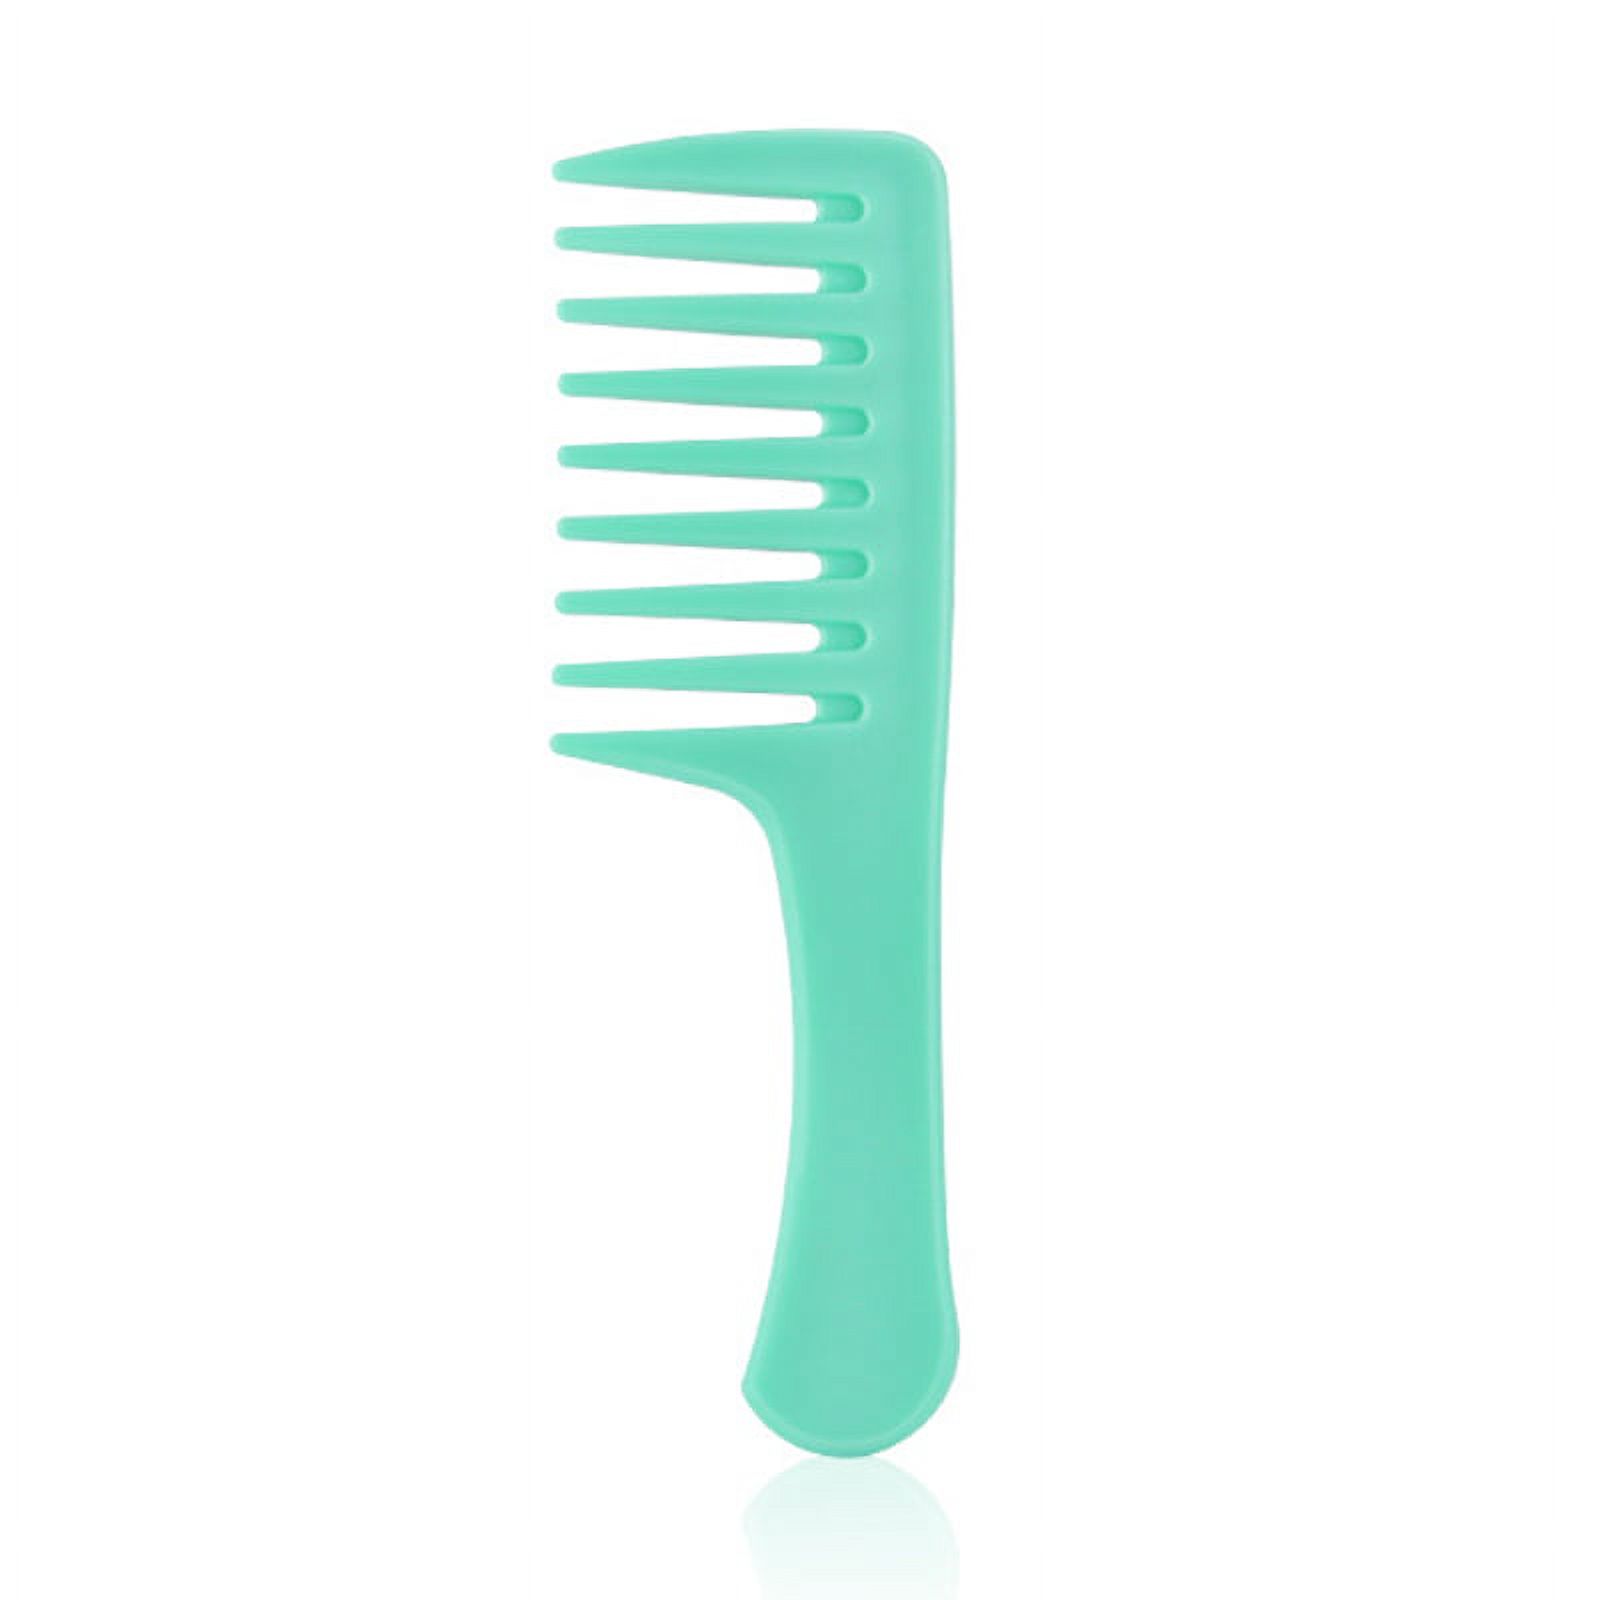 Shun Hair Comb Plastic Household Candy Color Big Tooth Comb Green Wide Tooth Comb Durable Detangling Hair Brush Professional Handgrip Comb for Curly Hair Long Hair Wet Hair New - image 2 of 2